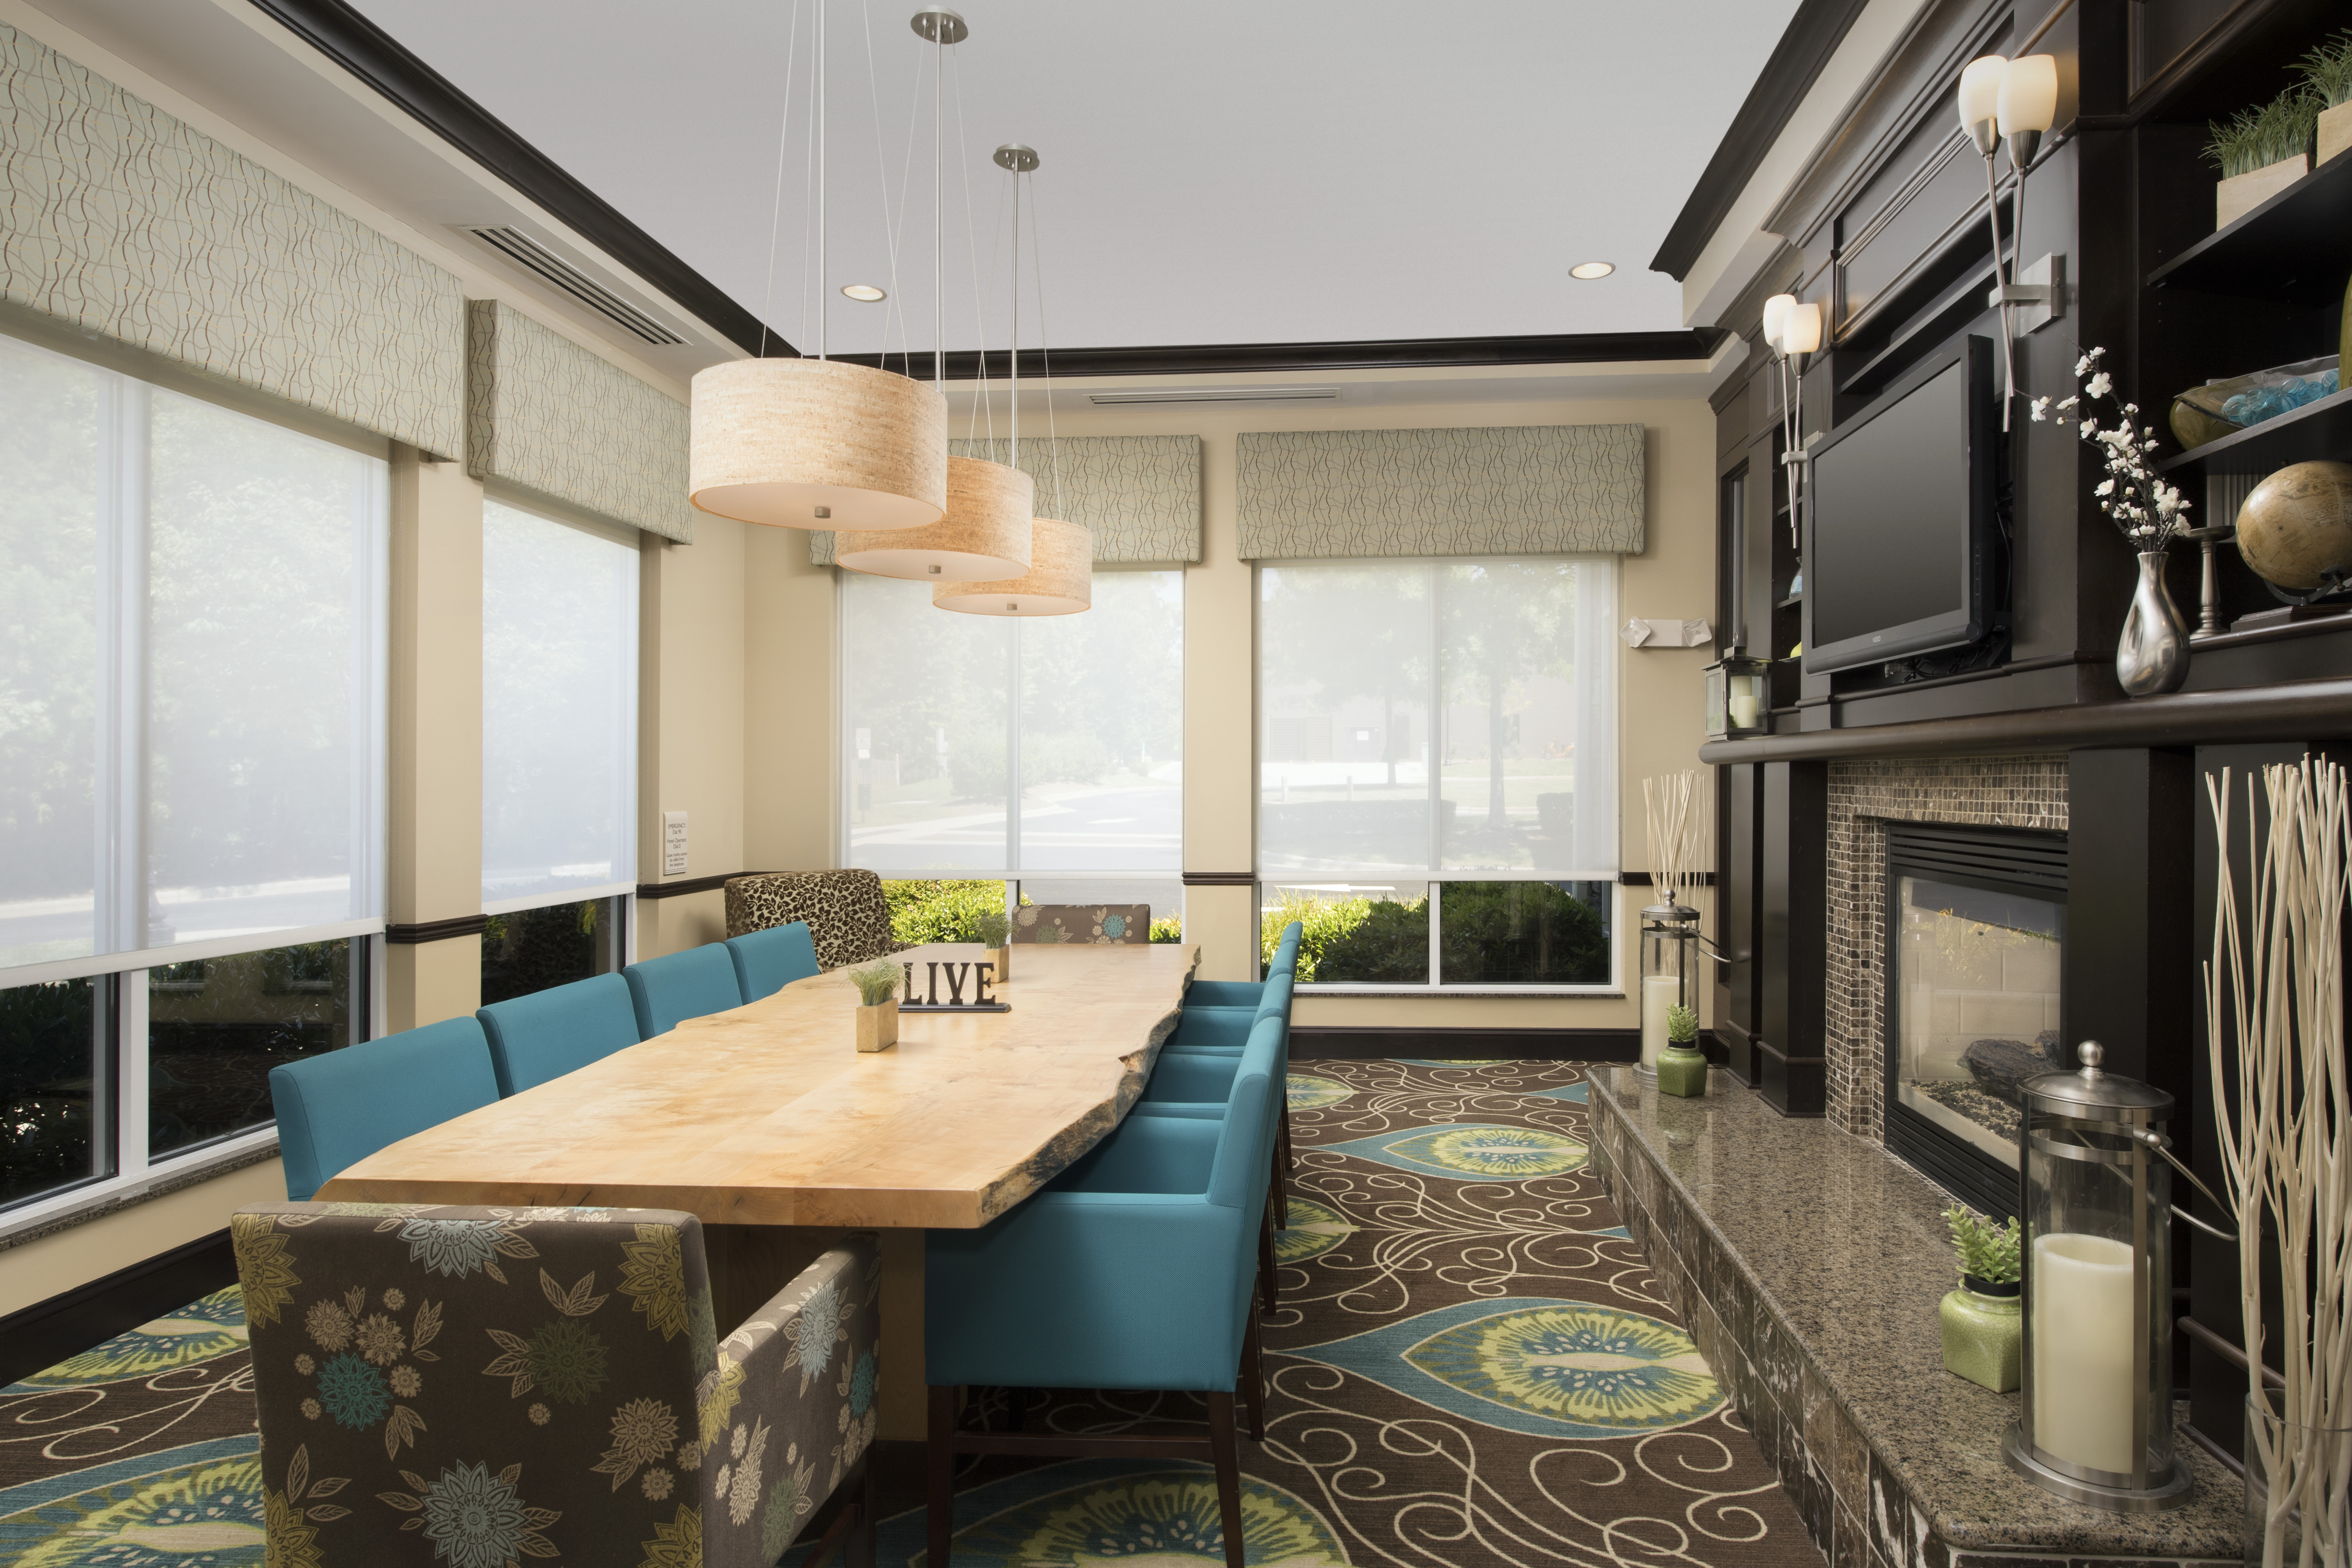  Seating for 10 at Community Table, Fireplace, TV, and Large Windows in Lobby